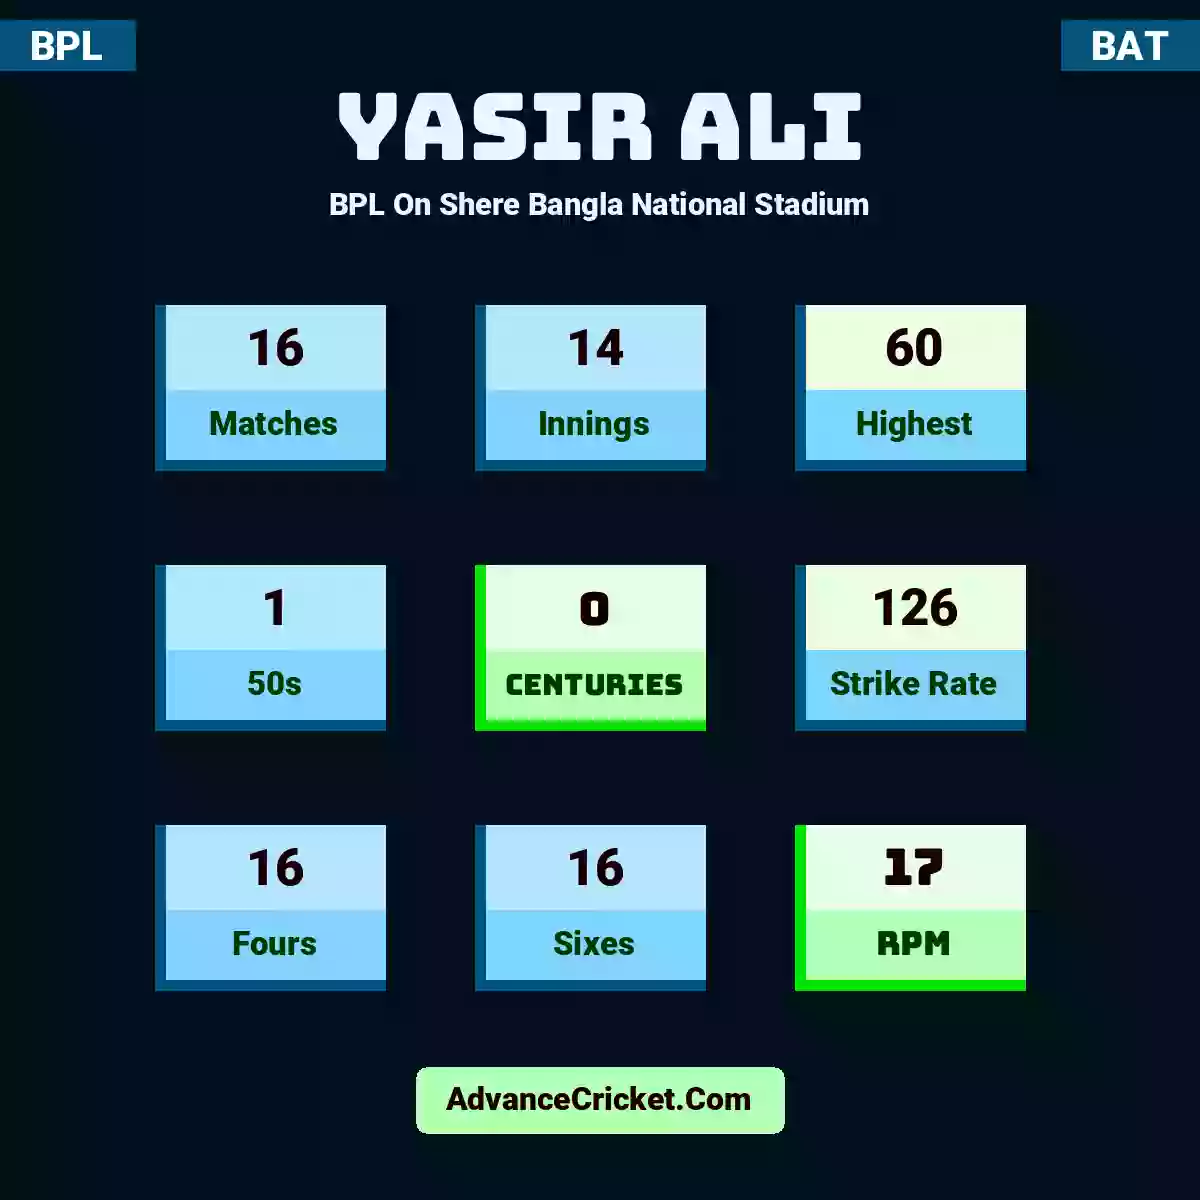 Yasir Ali BPL  On Shere Bangla National Stadium, Yasir Ali played 16 matches, scored 60 runs as highest, 1 half-centuries, and 0 centuries, with a strike rate of 126. Y.Ali hit 16 fours and 16 sixes, with an RPM of 17.